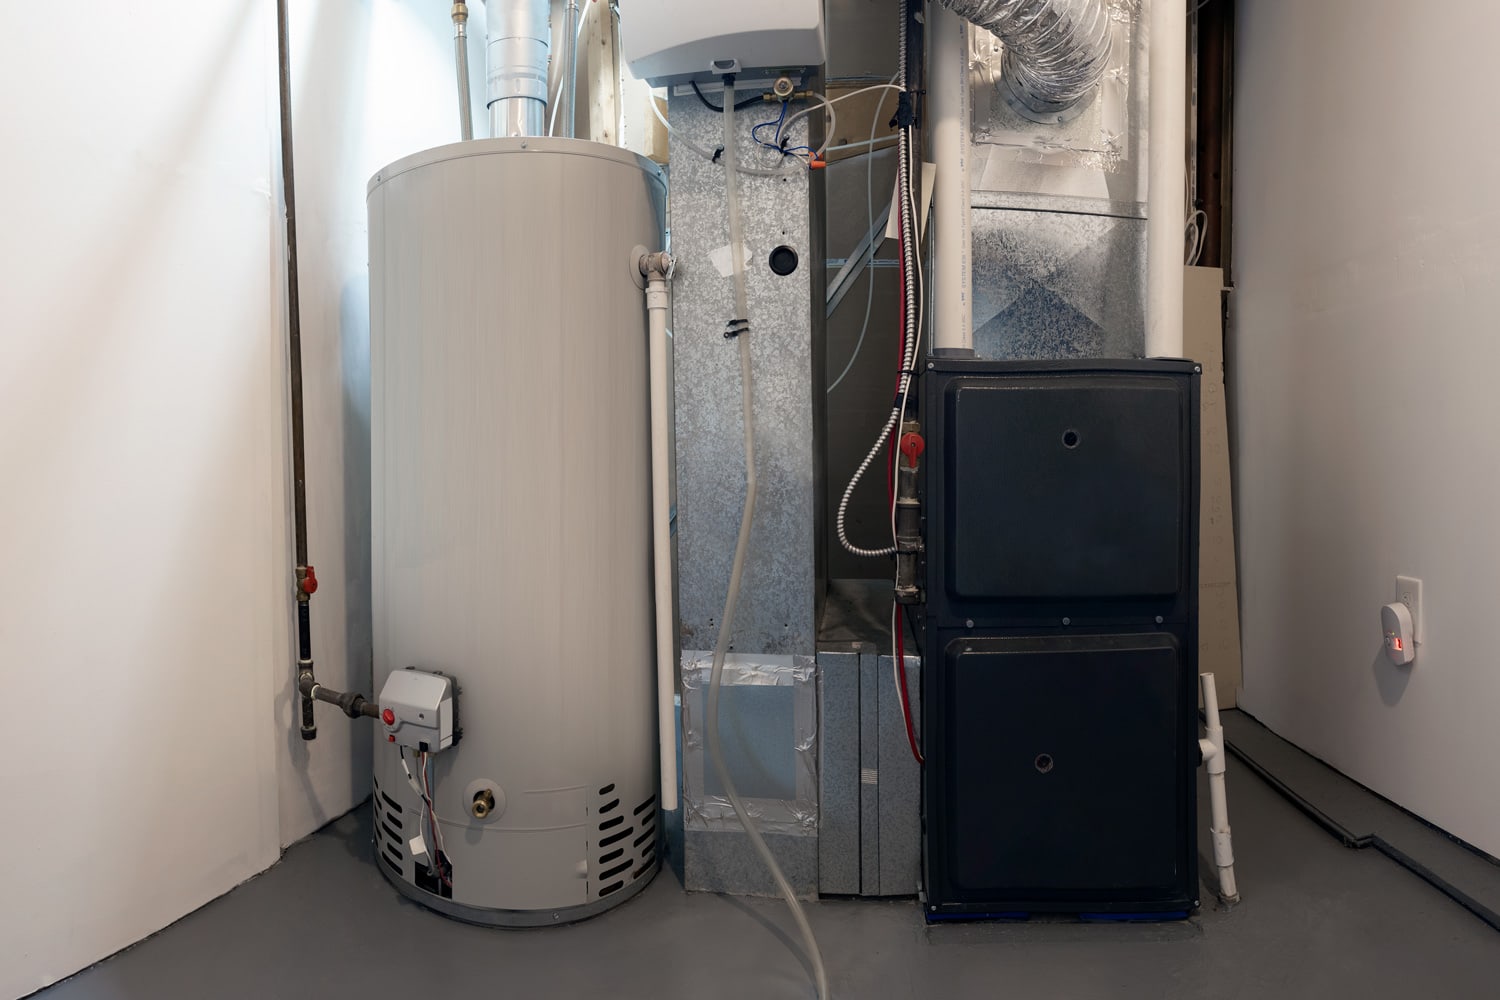 A home high efficiency furnace, boiler water heater and humidifier.